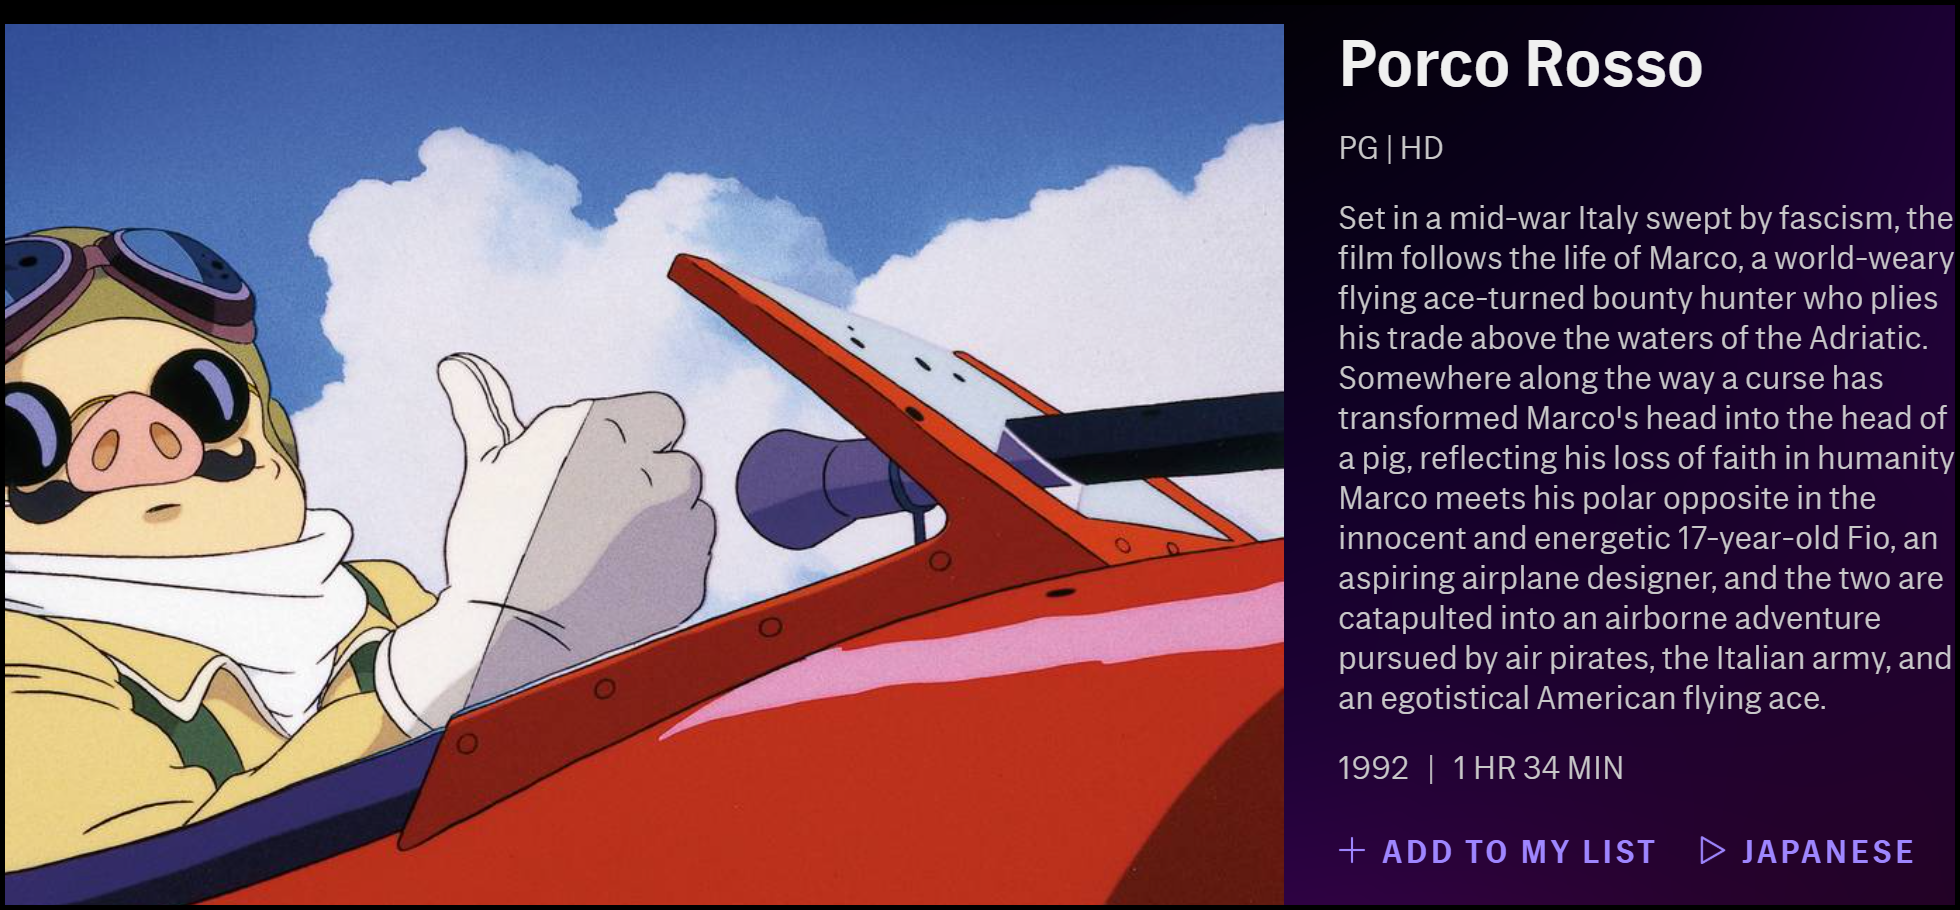 The description of Porco Rosso on HBO Max.